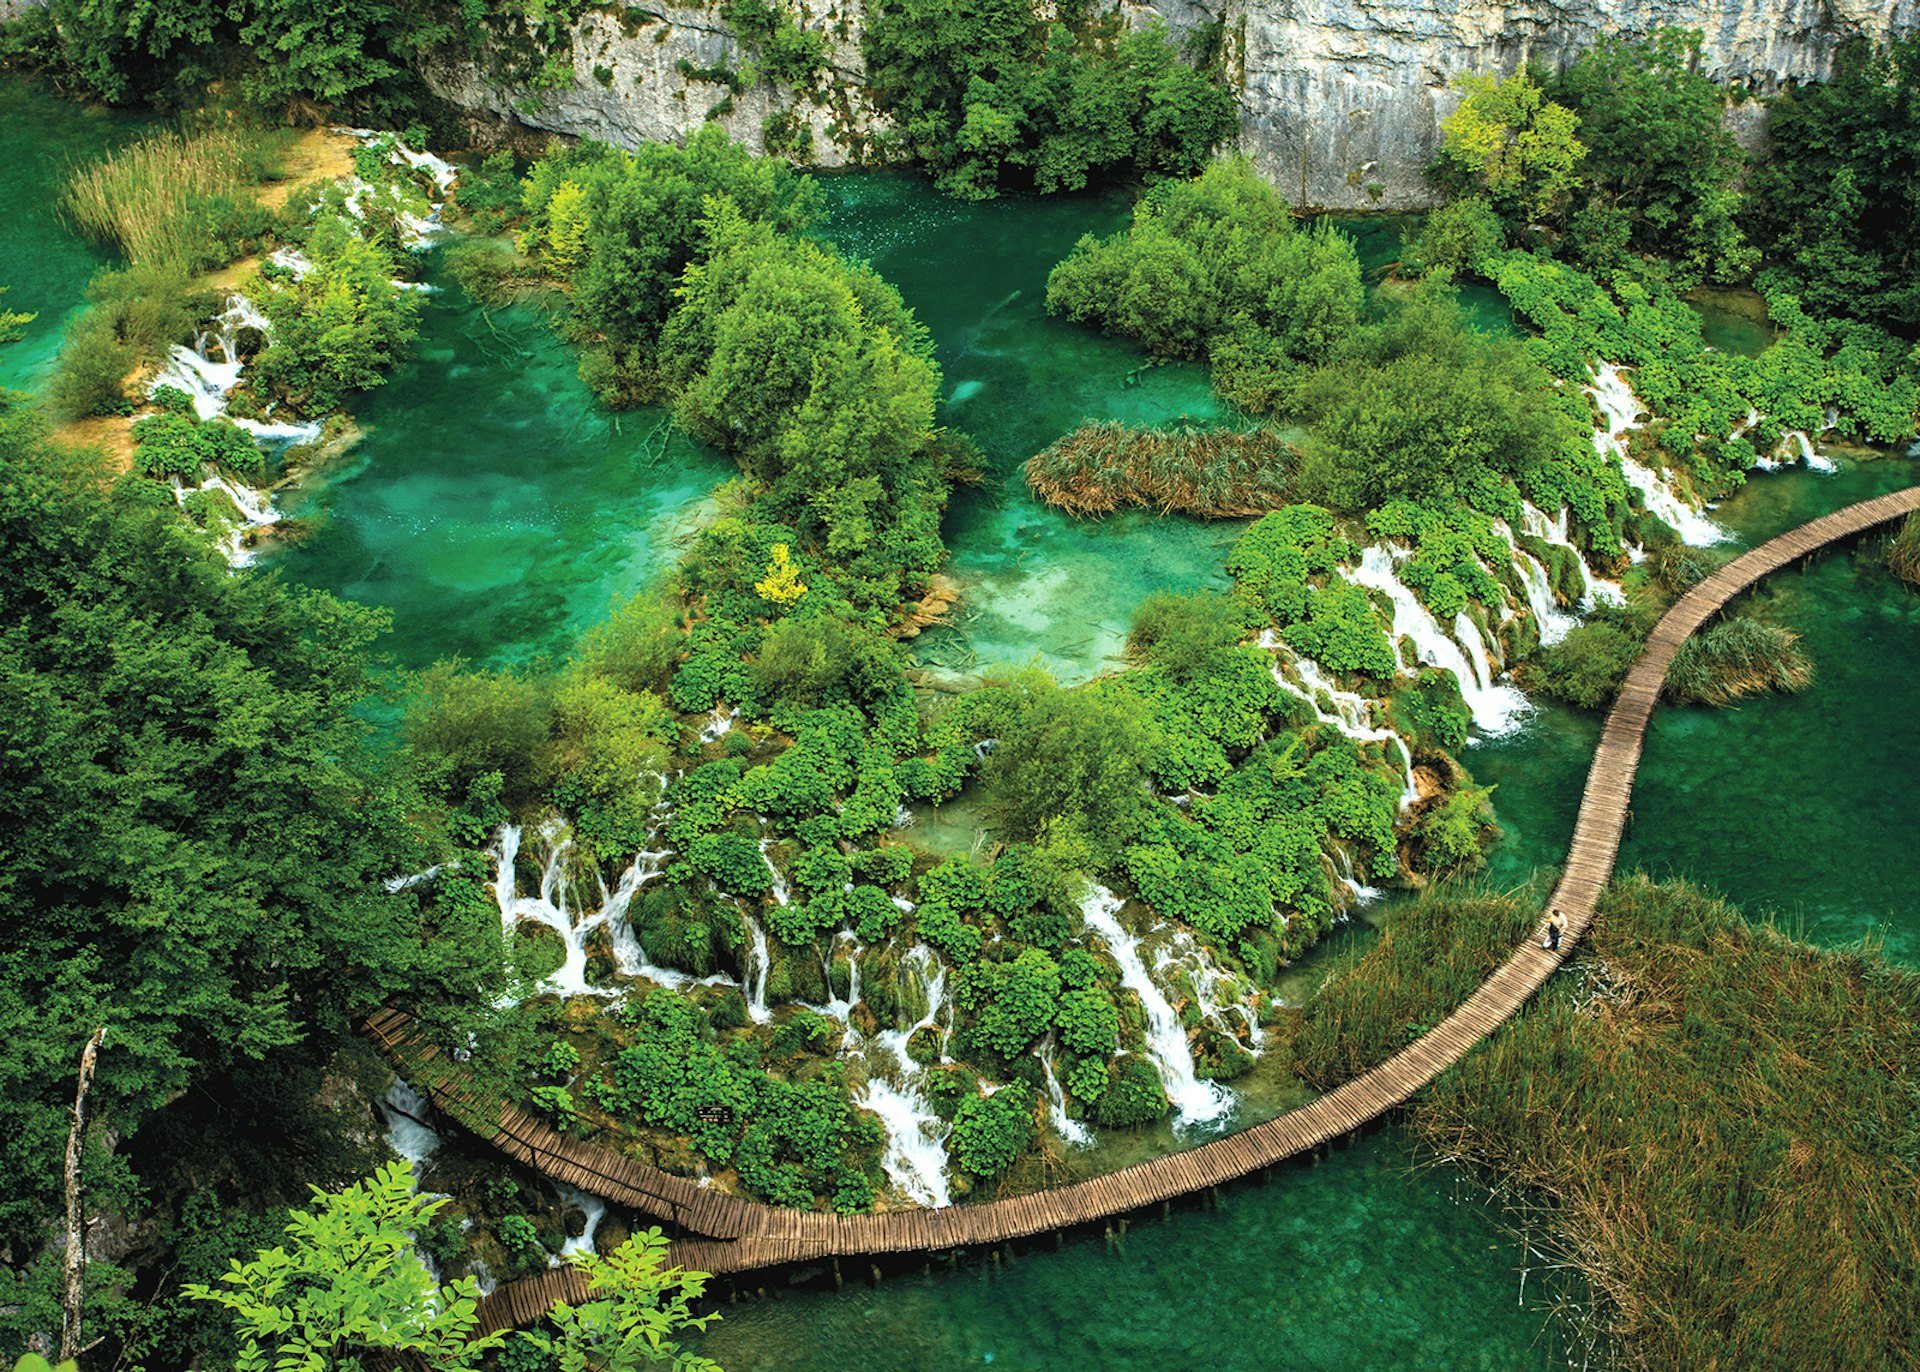 The water from terraced lakes cascades through Croatia's Plitvice Lakes National Park © Kelly Cheng / Getty Images